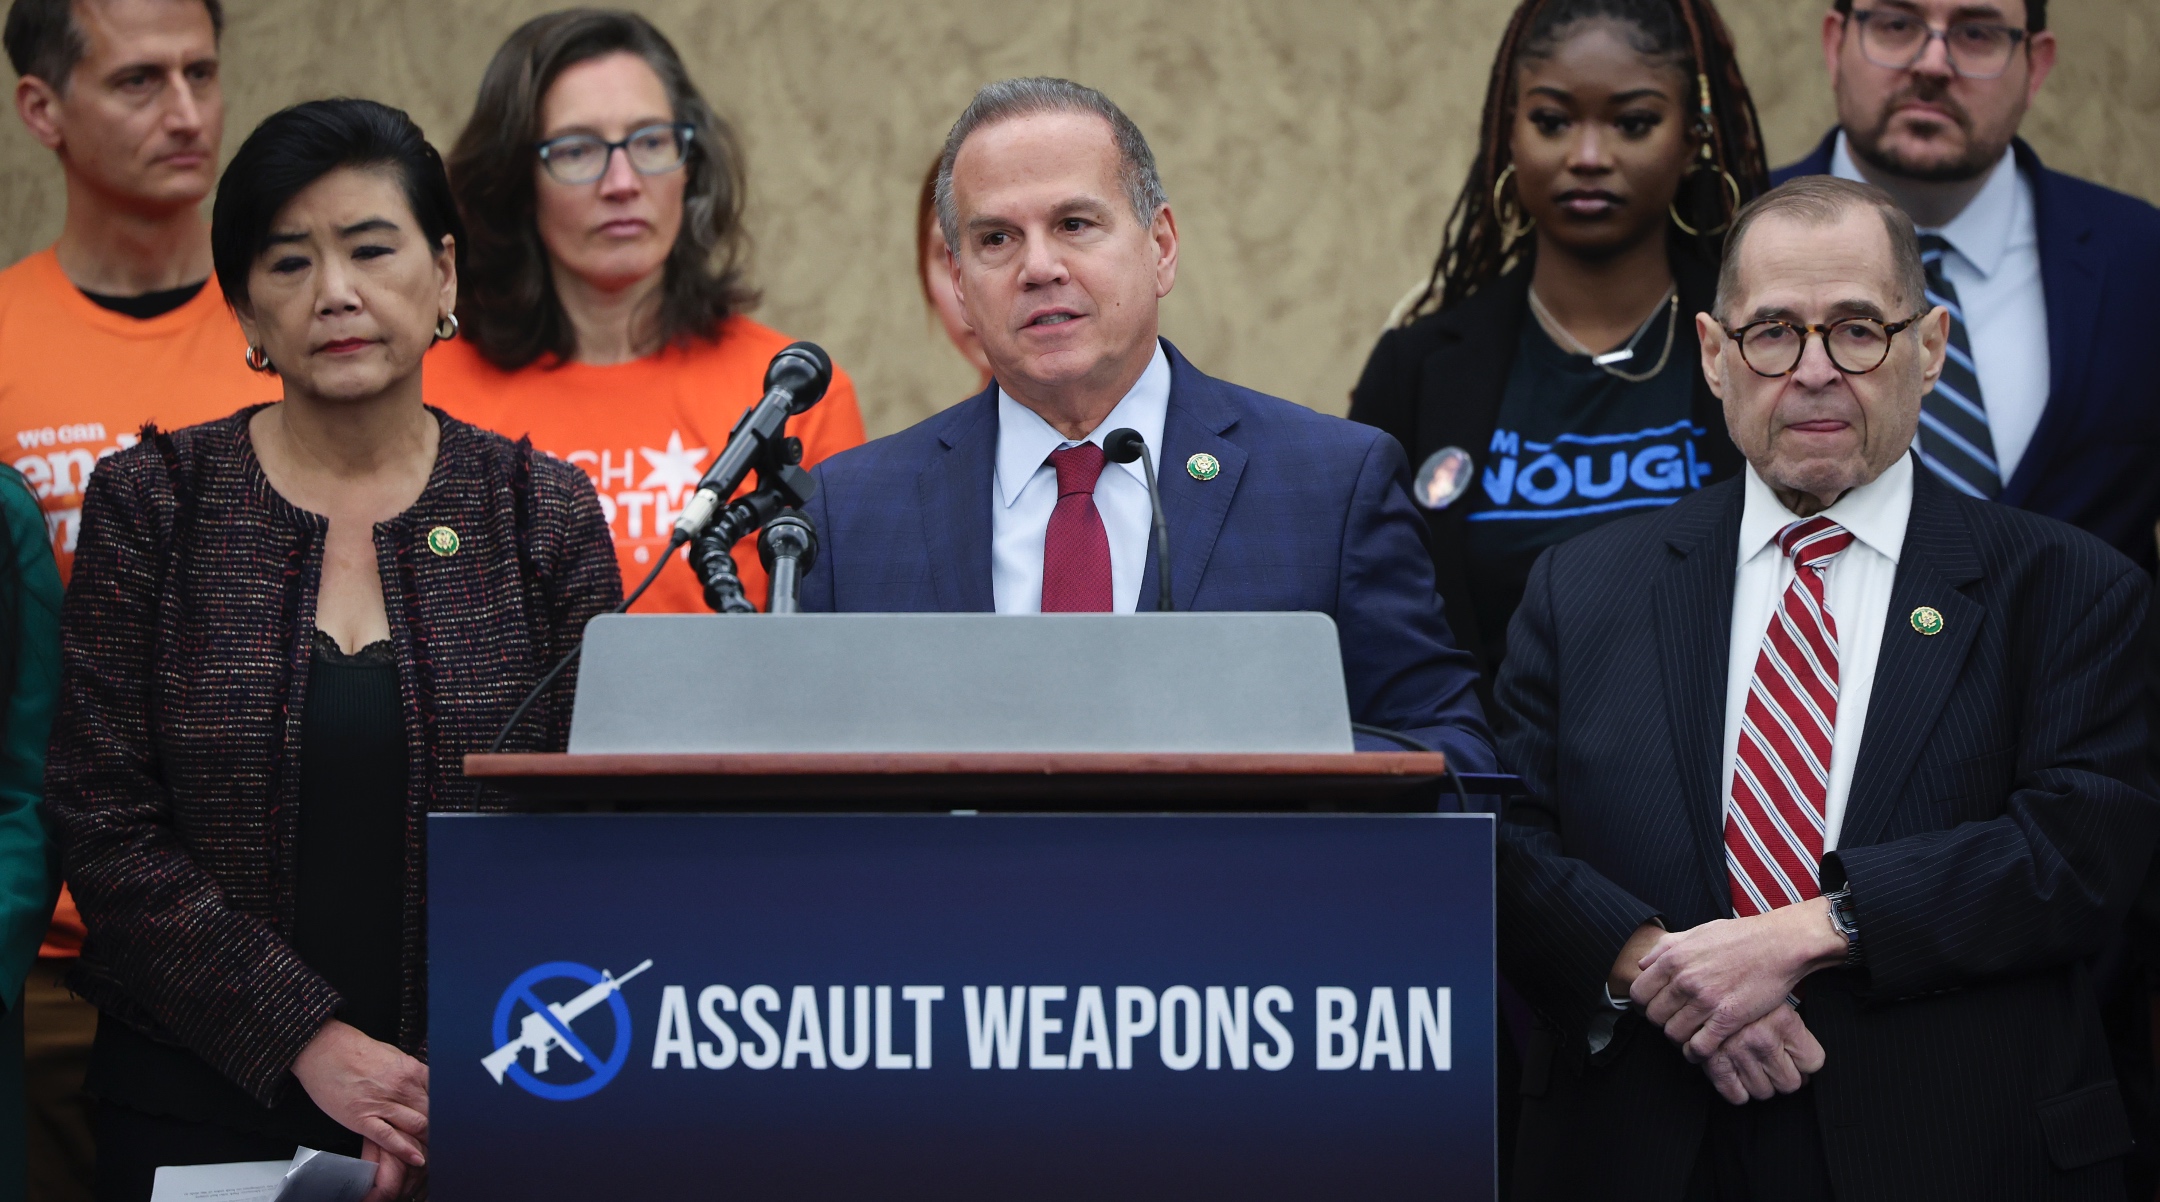 Rhode Island Democratic Rep. David Cicilline speaks during an event announcing the introduction of the Assault Weapons Ban Act at the U.S. Capitol February 1, 2023. (Win McNamee/Getty Images)